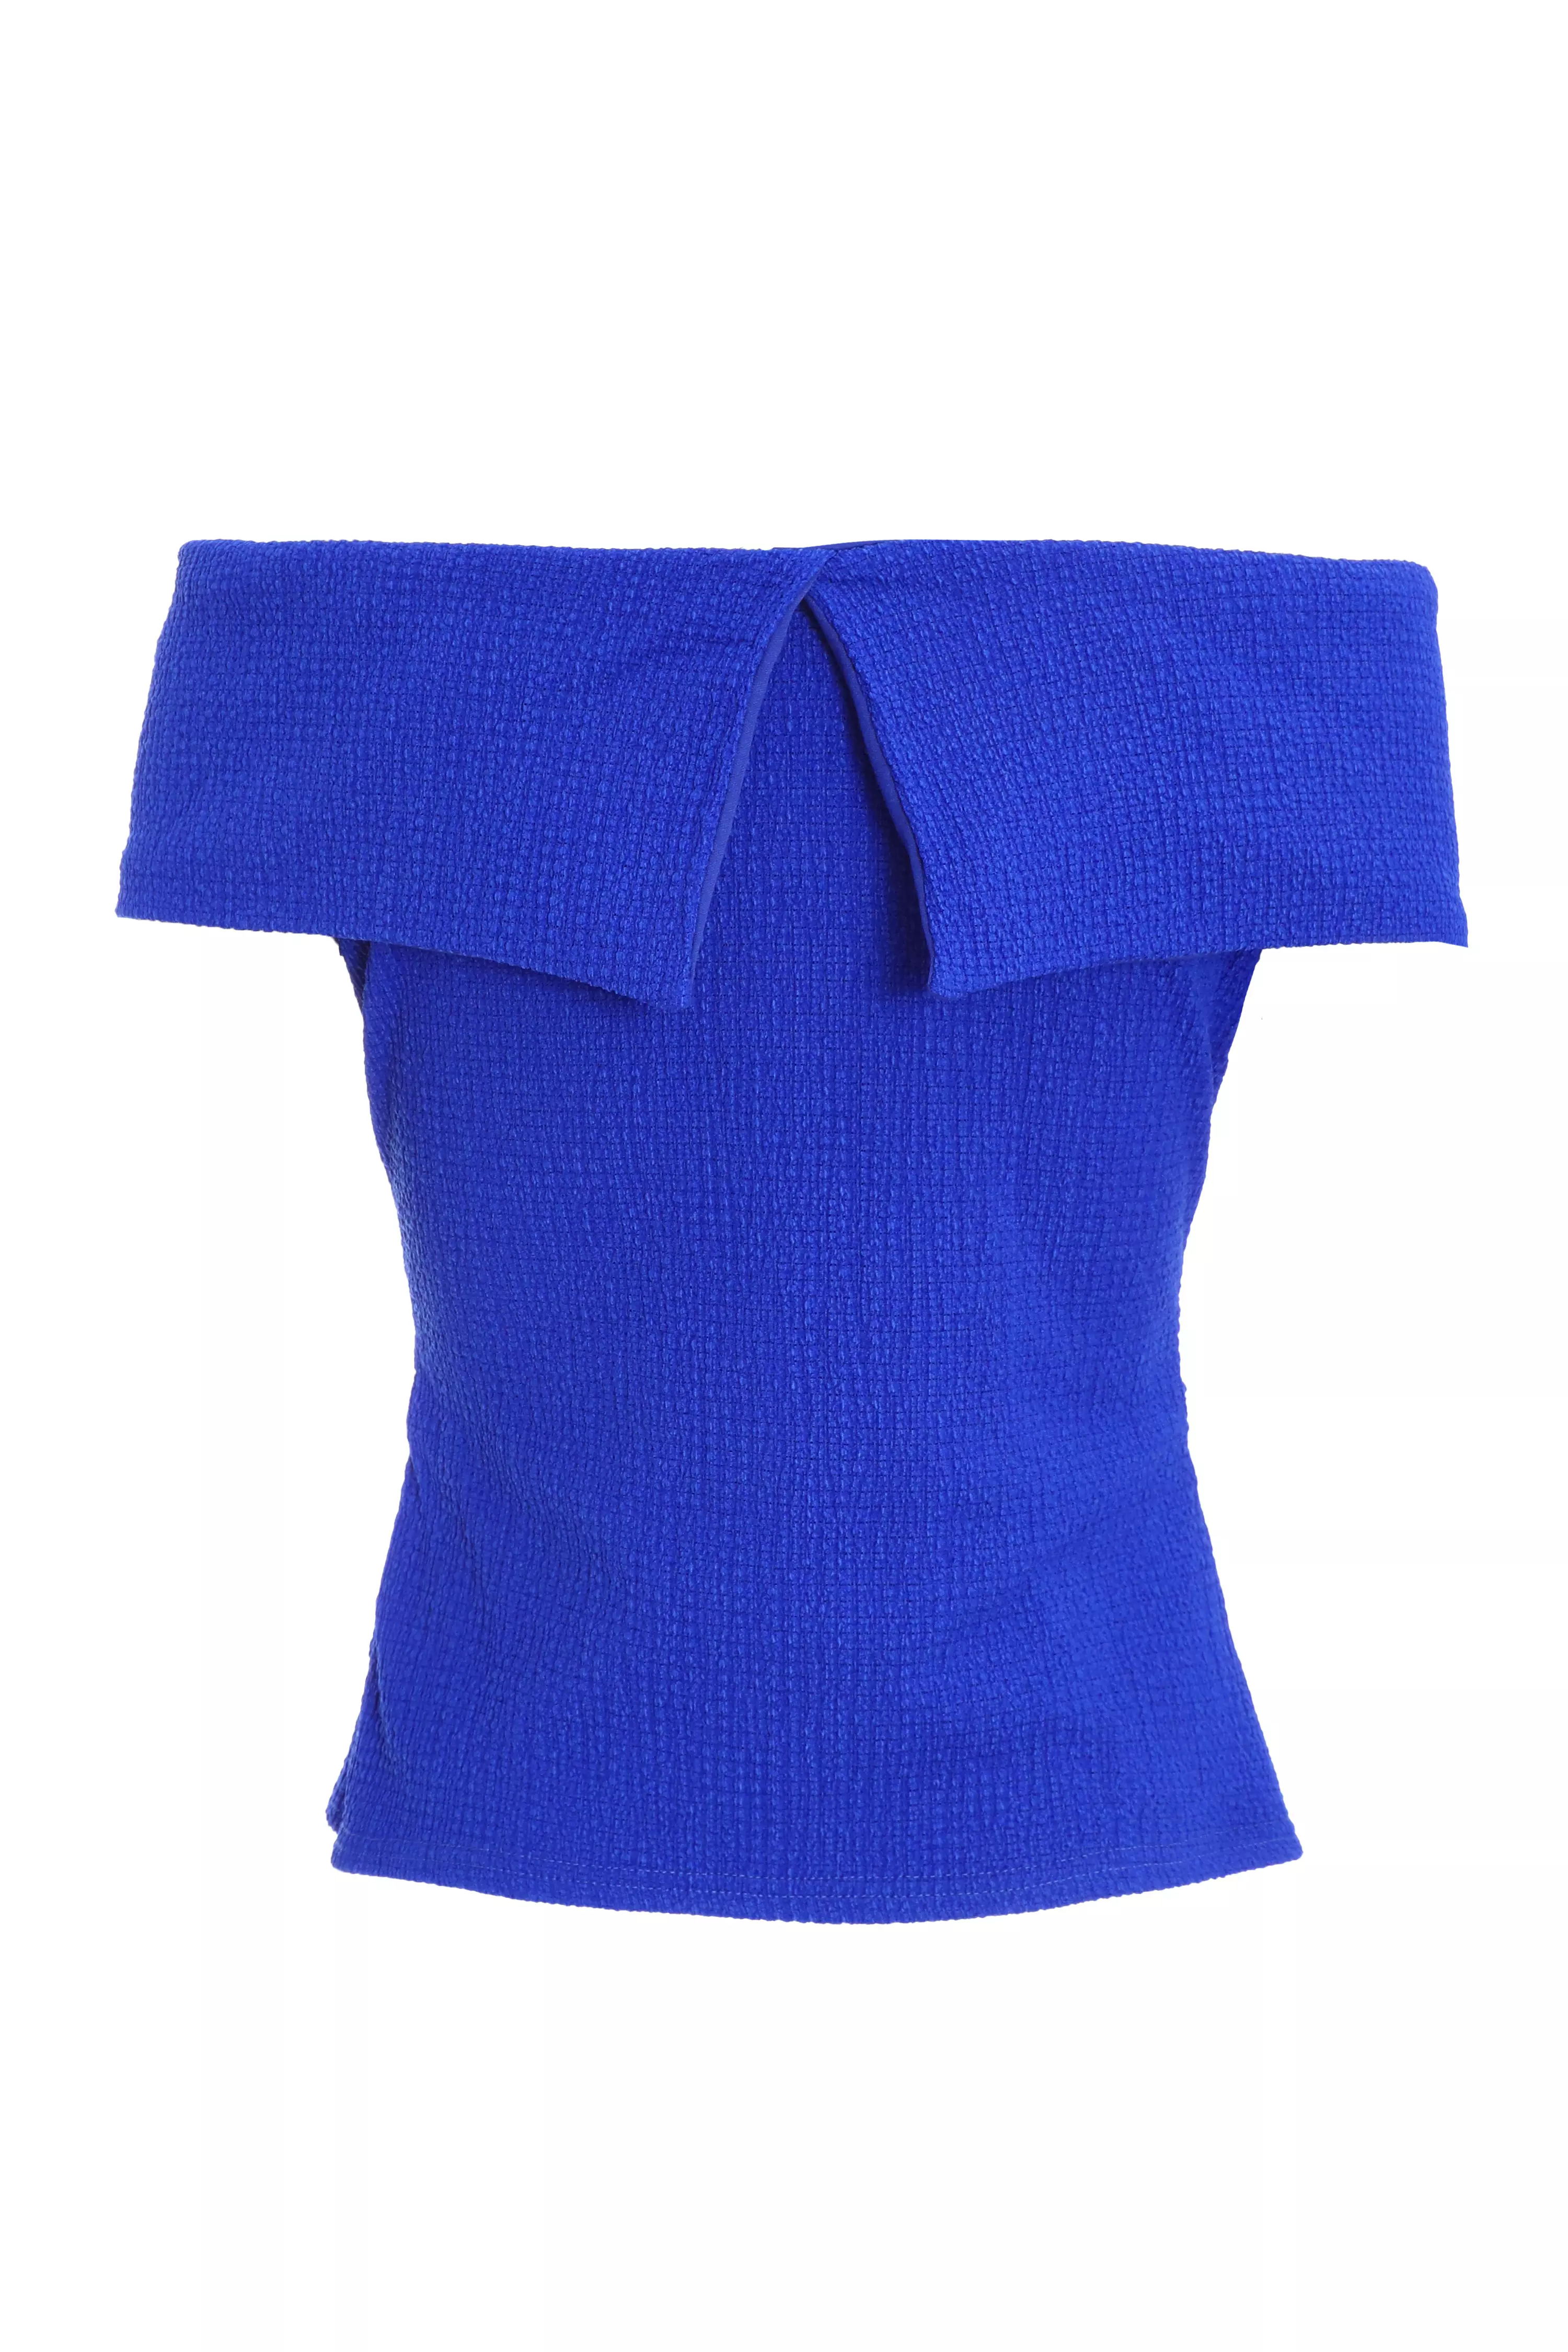 Blue Textured Bardot Ruched Top